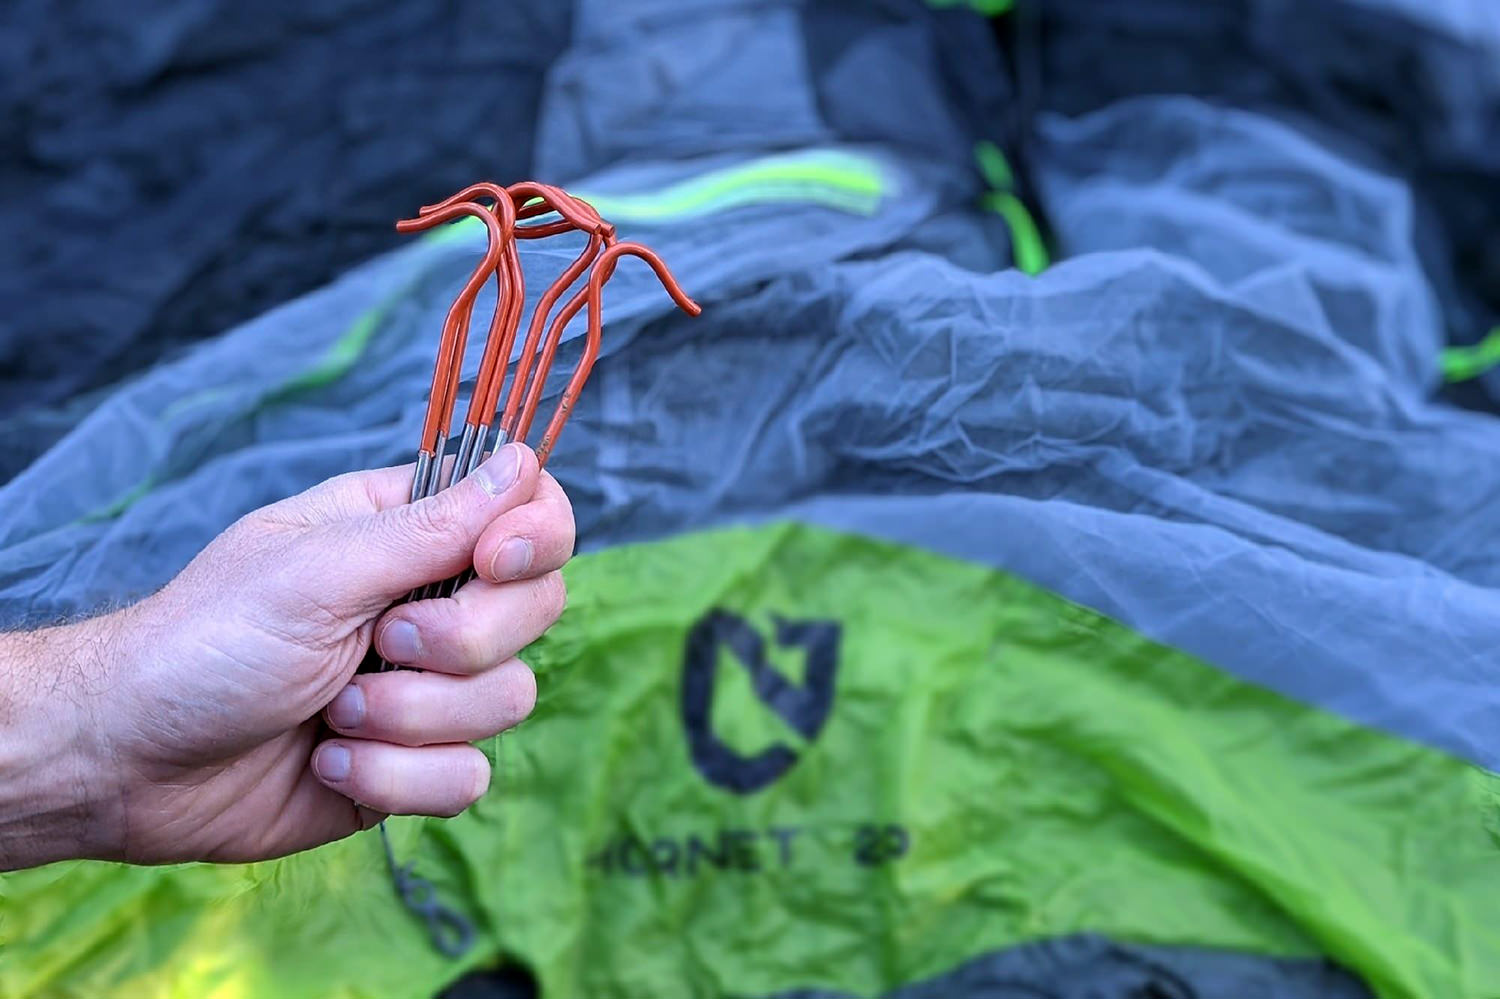 A backpacker's hand holding a set of Vargo Titanium Shepherds Hook tent stakes in his hand with a NEMO tent in the background